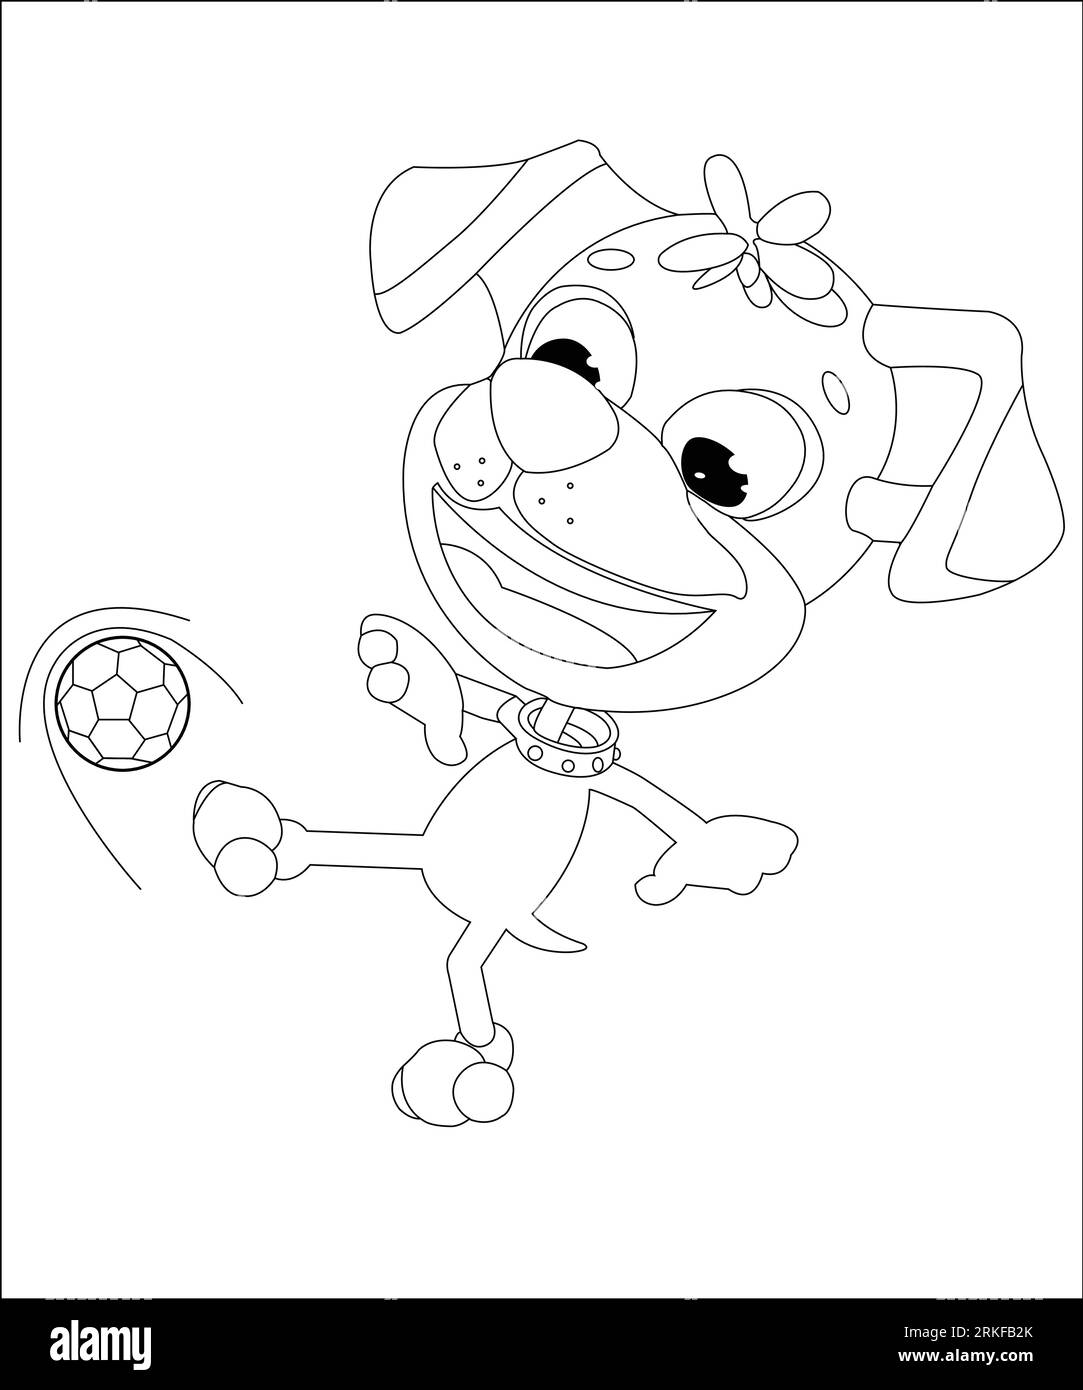 Coloring Page Outline Of cartoon boy with a soccer ball with dog. Football. Coloring book for kids. Cartoon illustration of a dog playing football Stock Vector